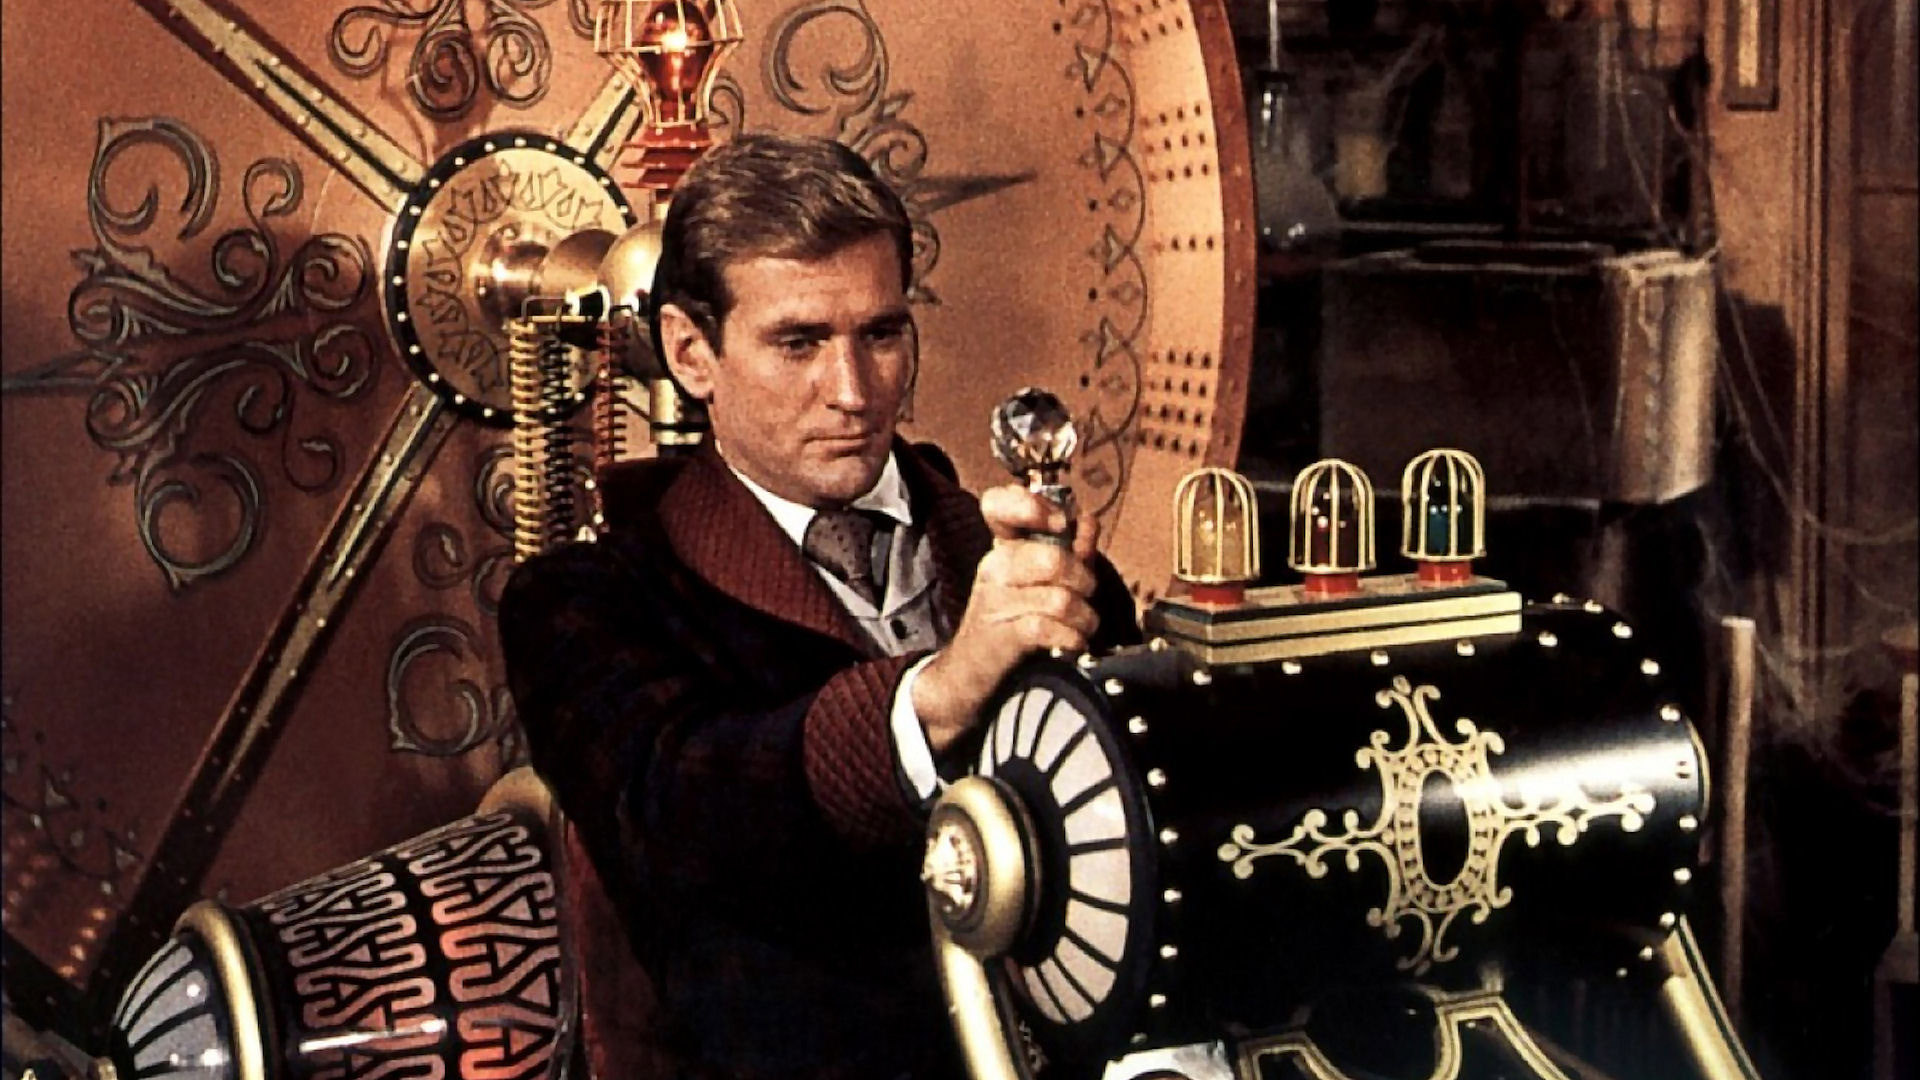 HG Wells' The Time Machine, as depicted in the 1960 adaptation